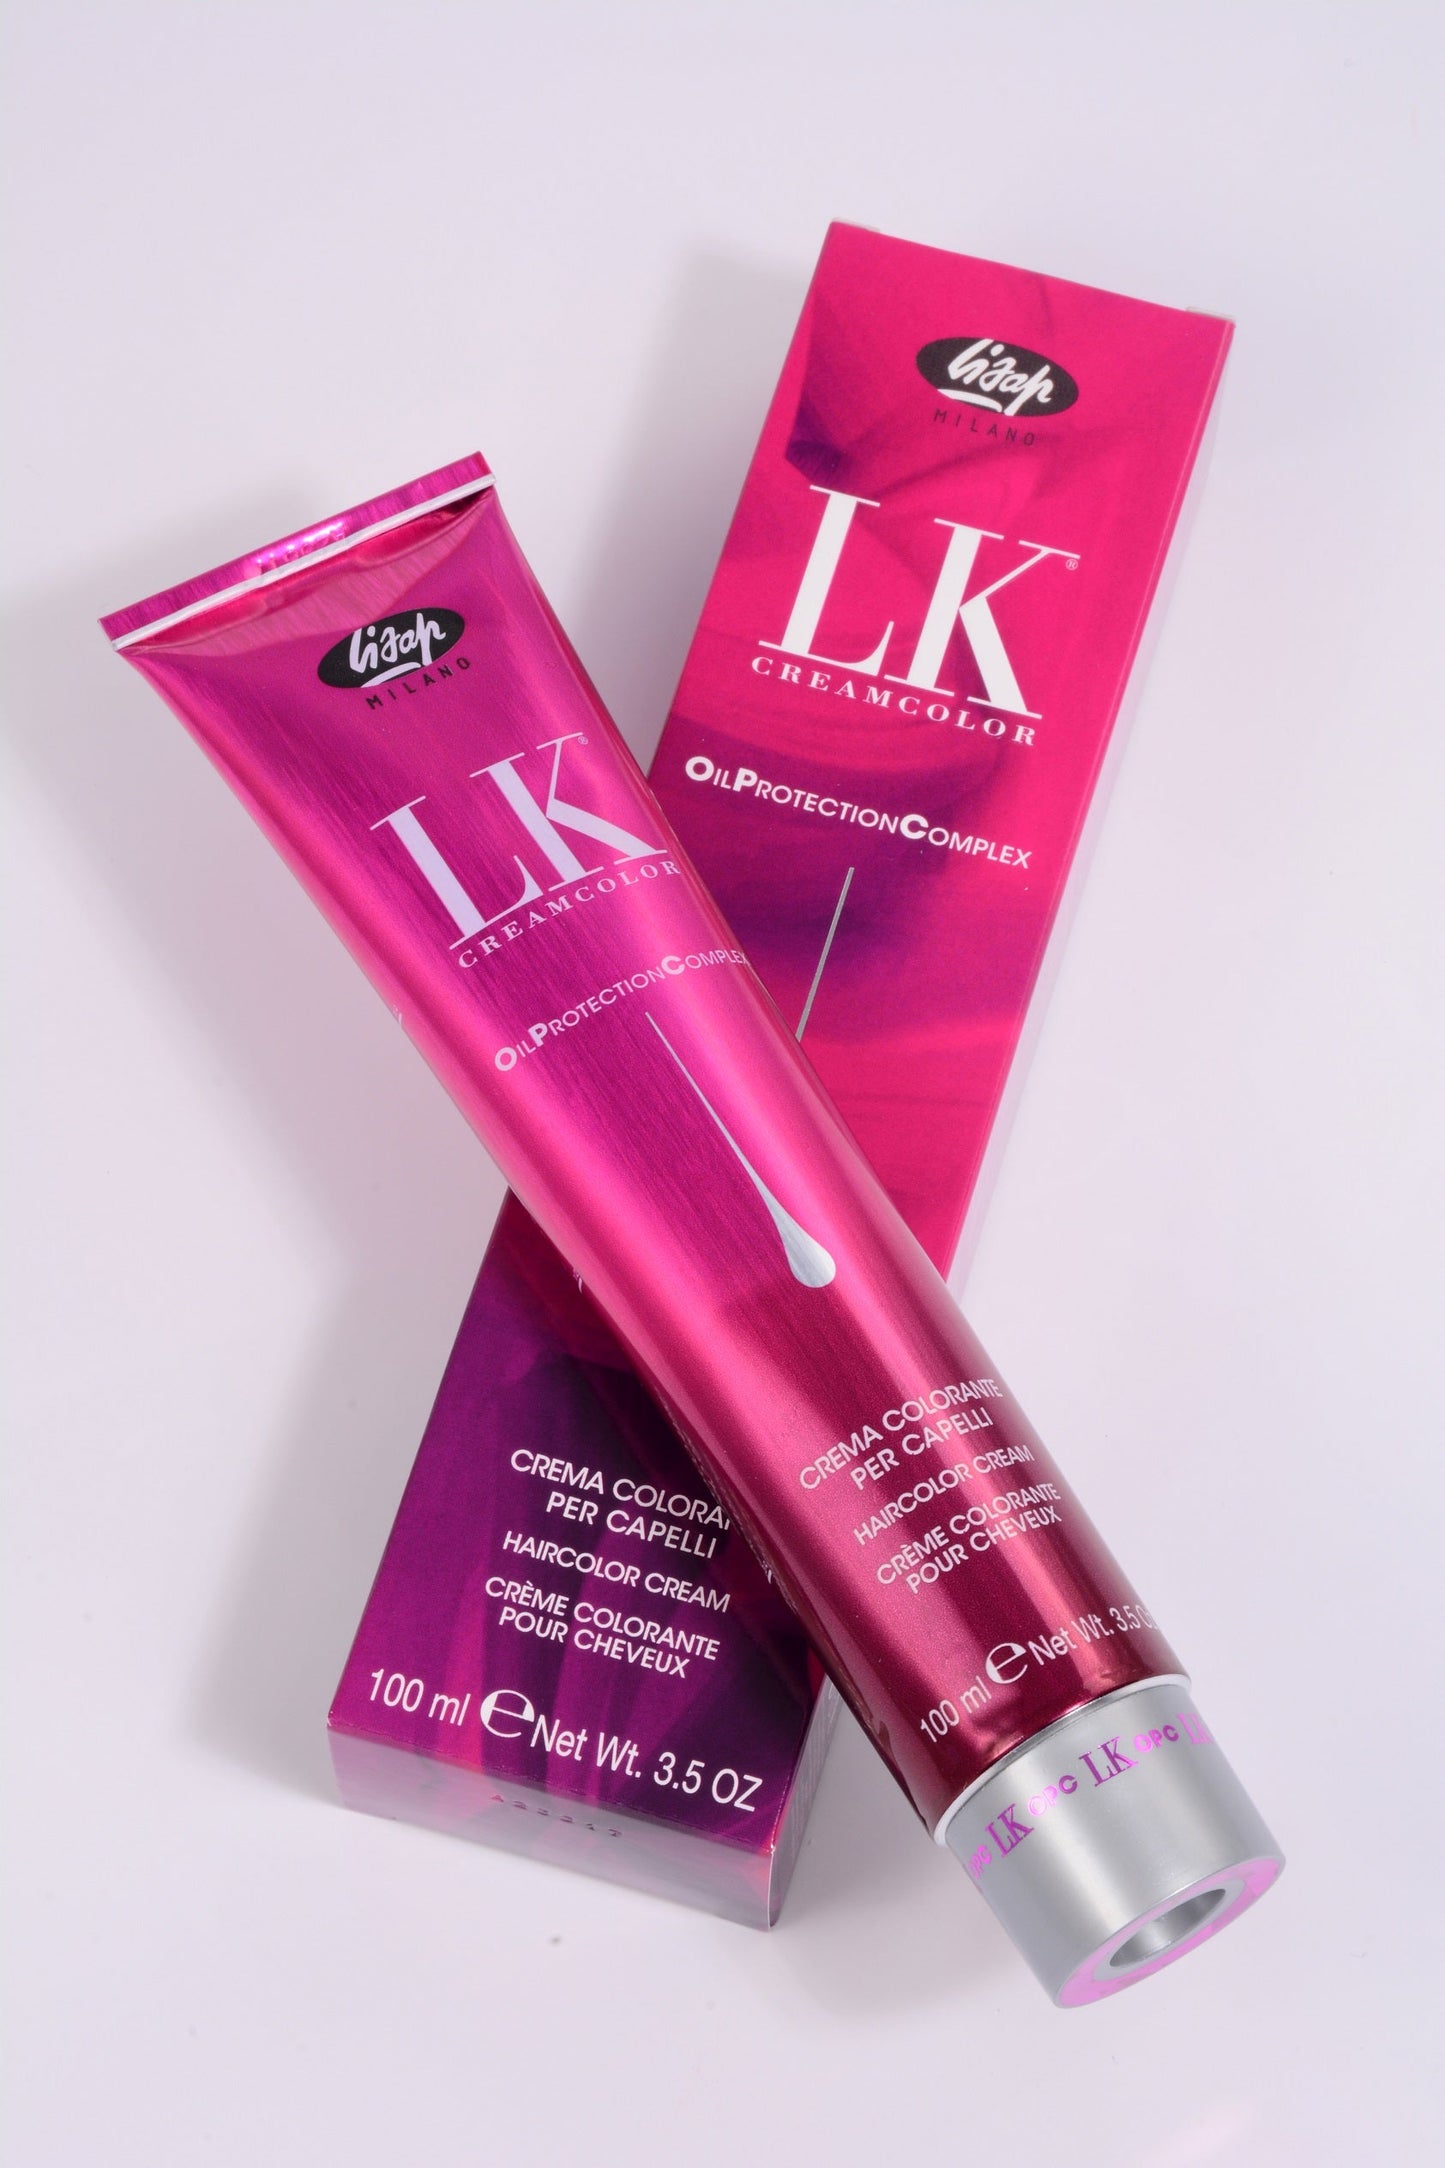 LK Creamcolor 9/82 Oil Protection Complex